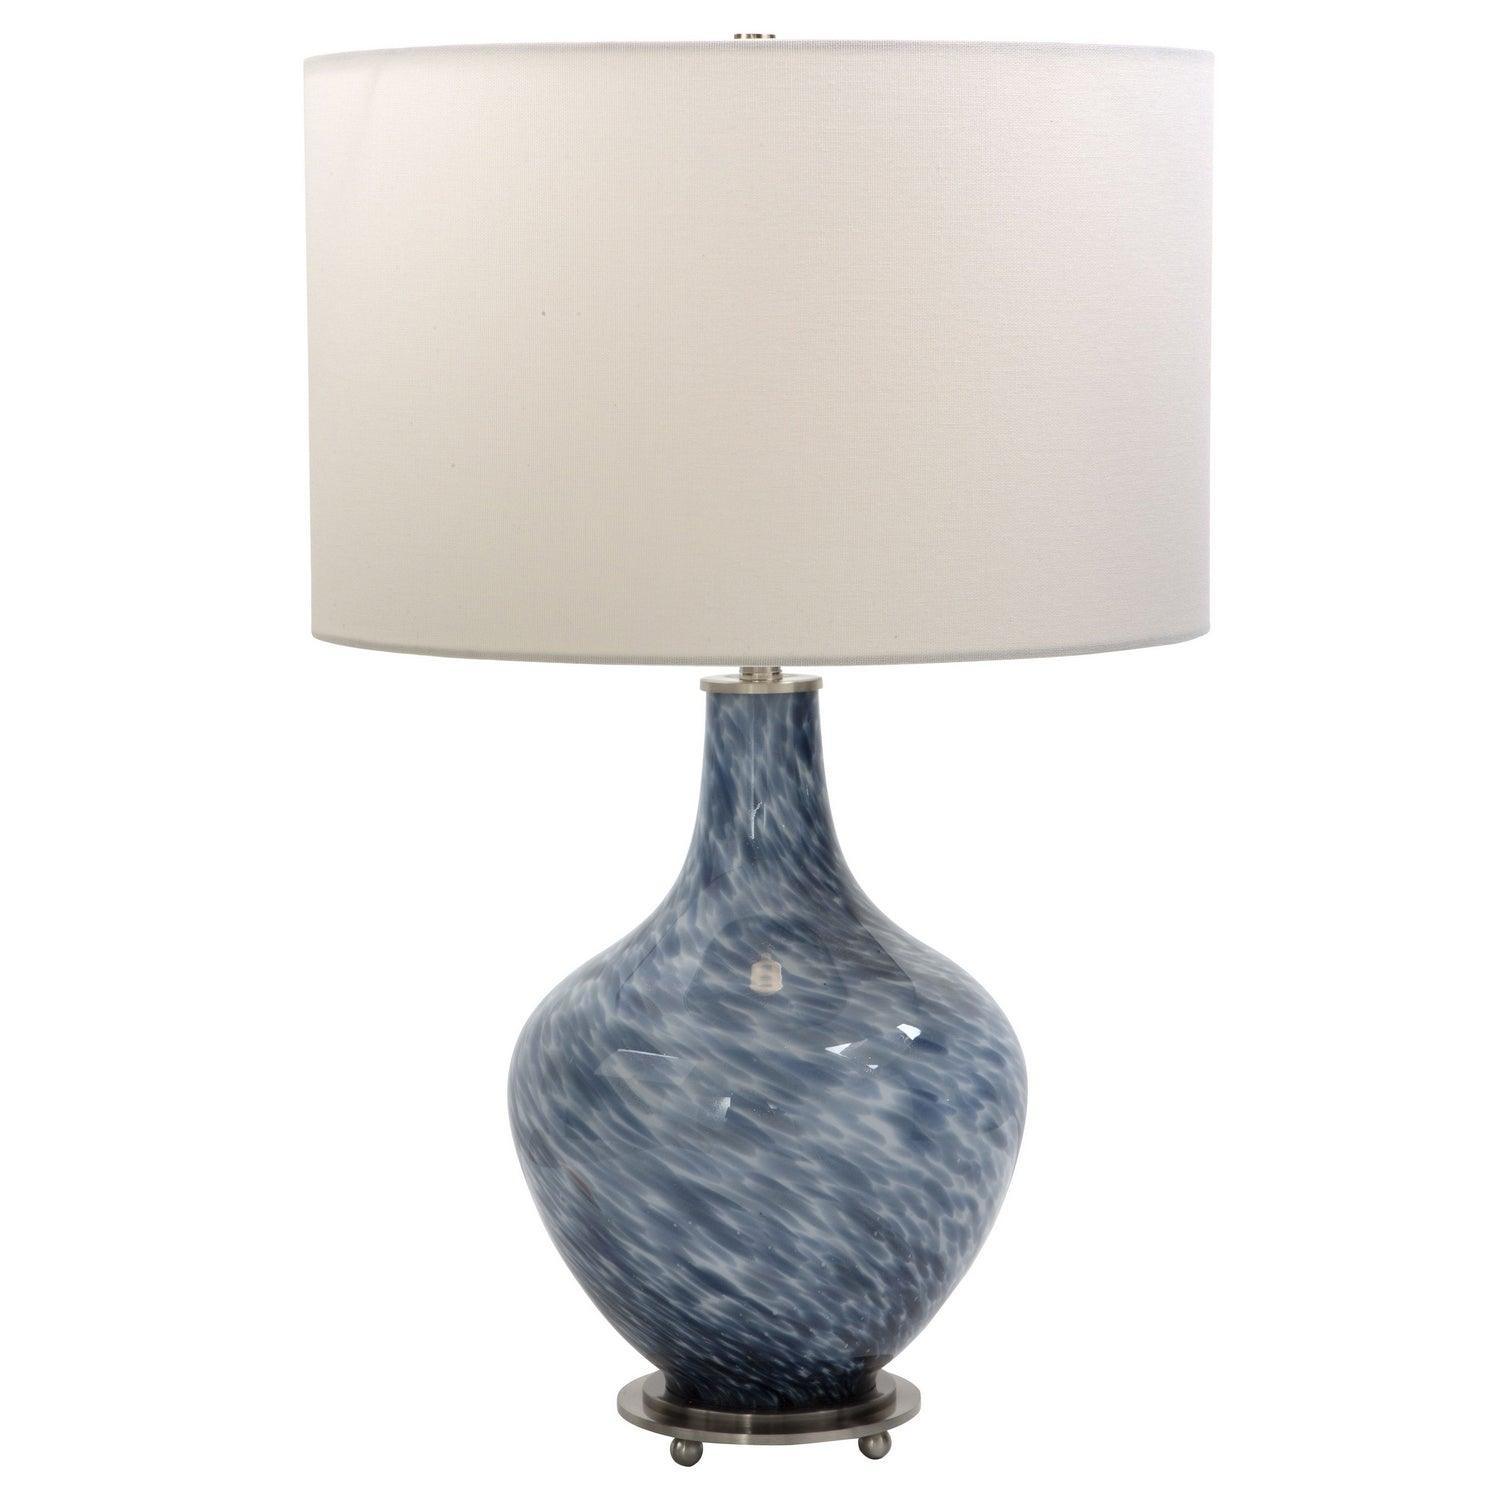 The Uttermost - Cove One Light Table Lamp - 28482-1 | Montreal Lighting & Hardware